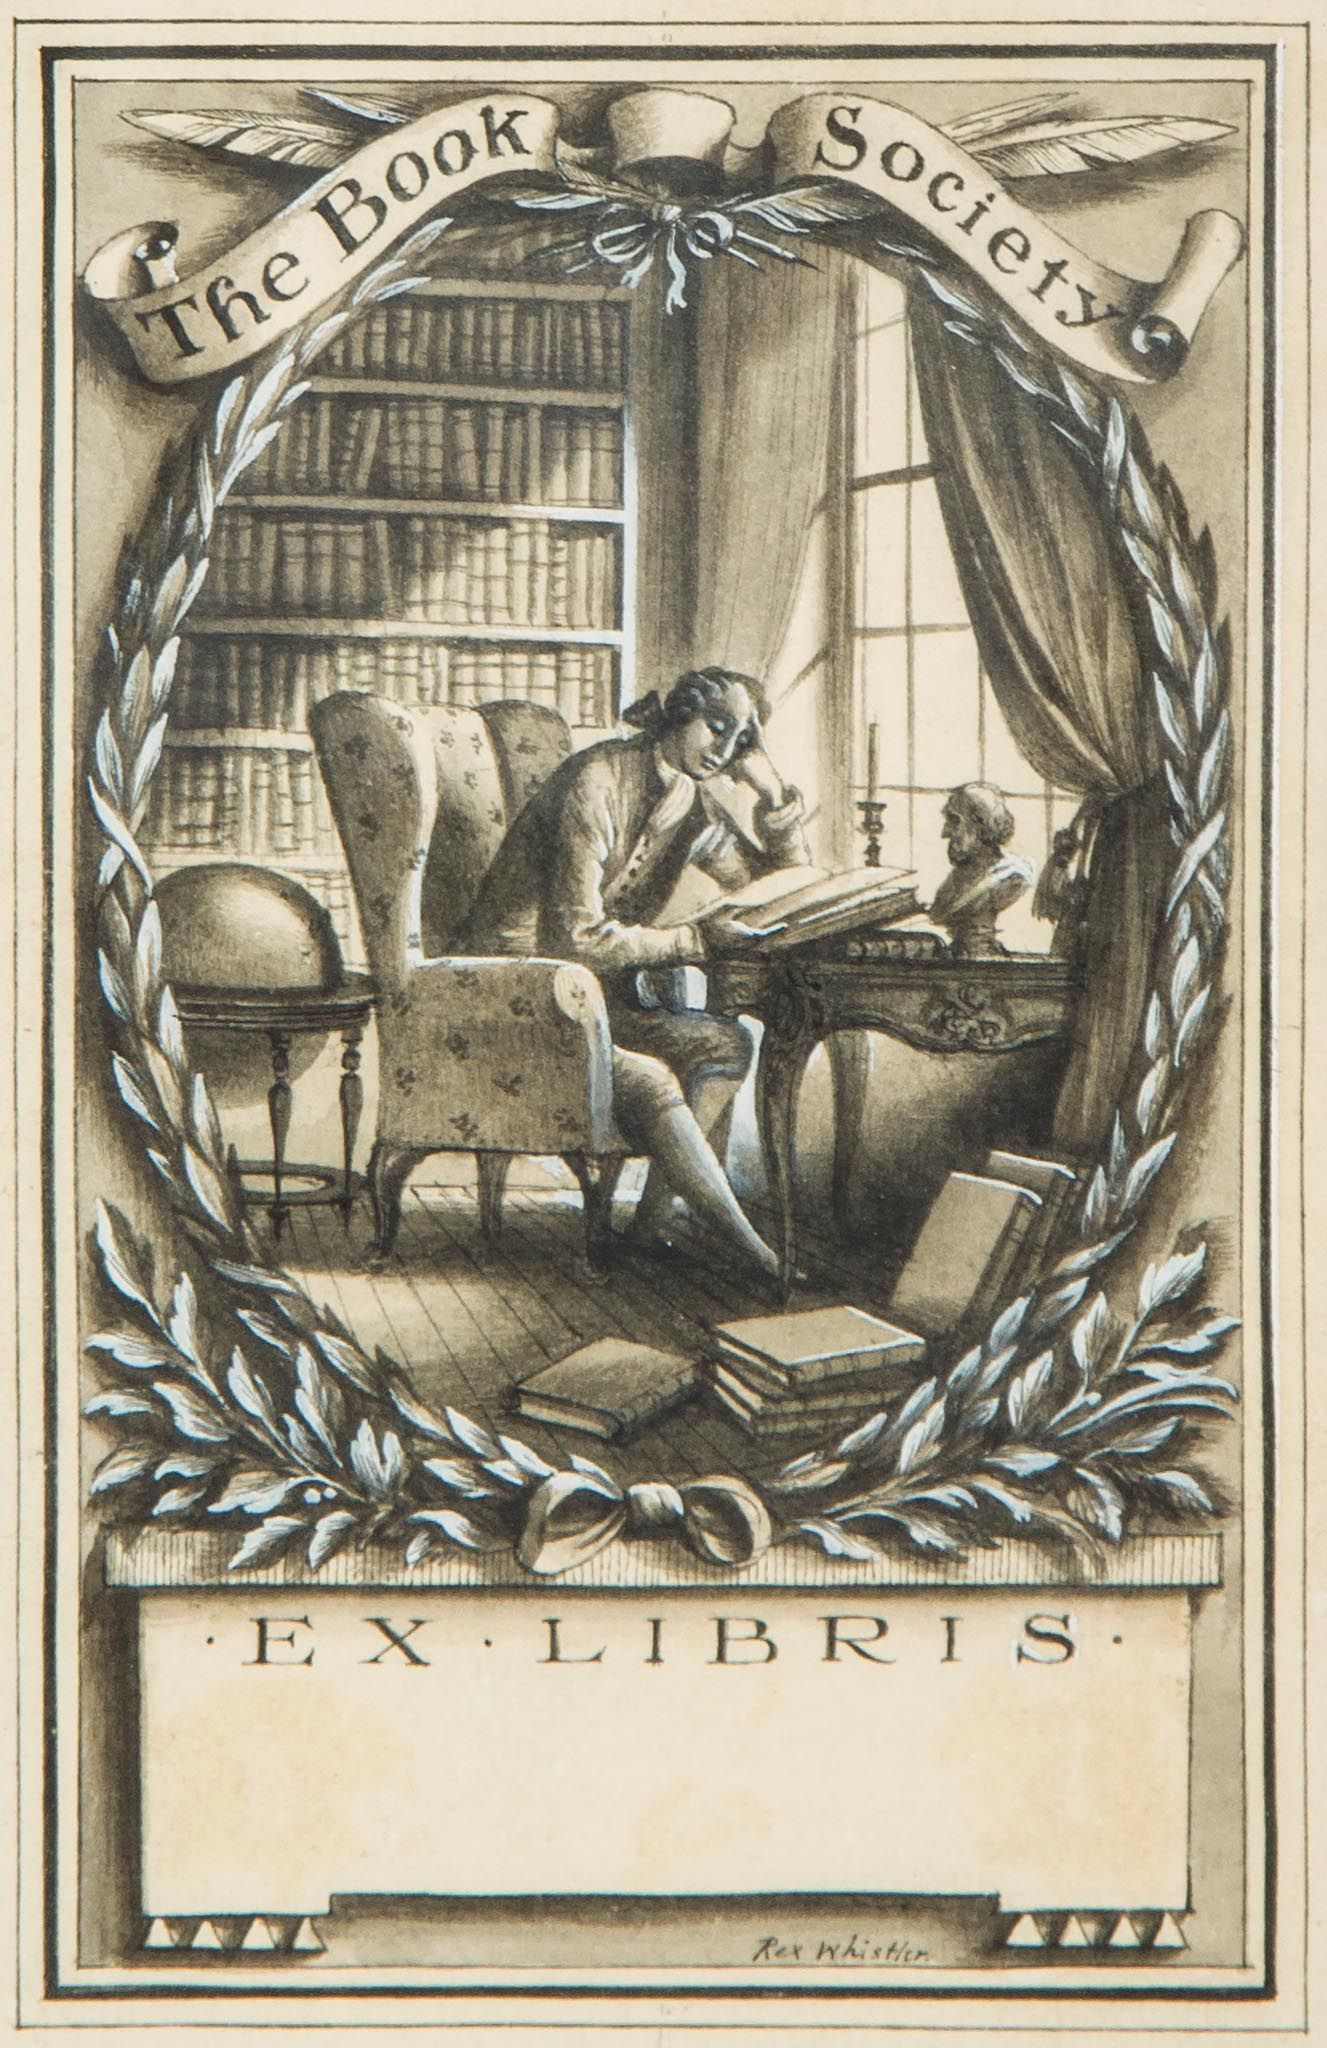 Whistler (Rex) - Design for book-plate for The Book Society,  original drawing of an 18th century